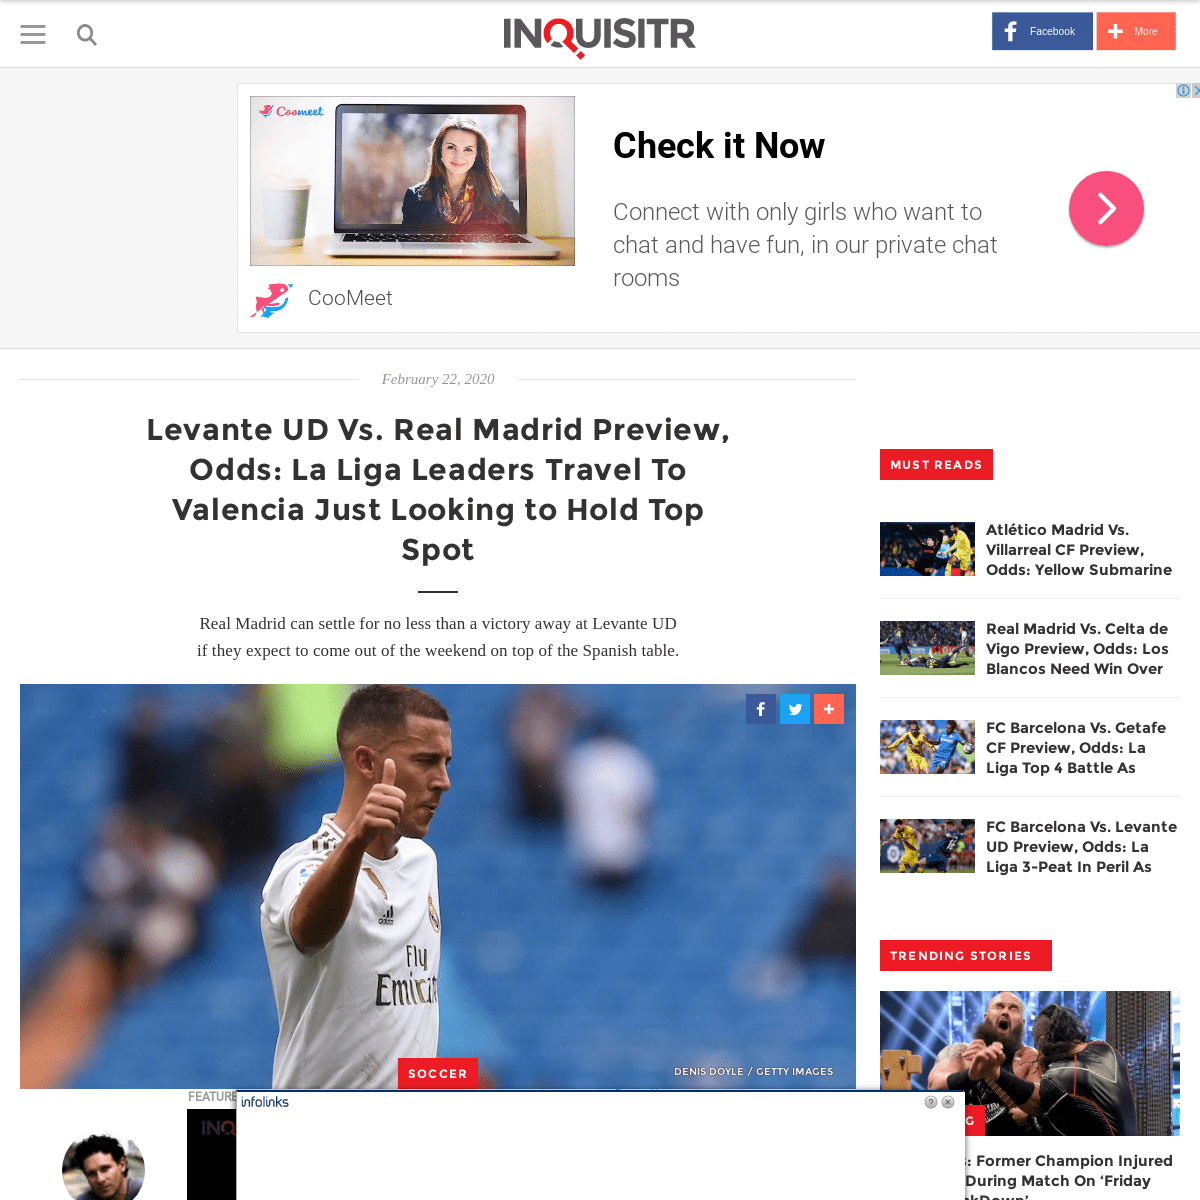 A complete backup of www.inquisitr.com/5905793/levante-ud-vs-real-madrid-preview-odds/